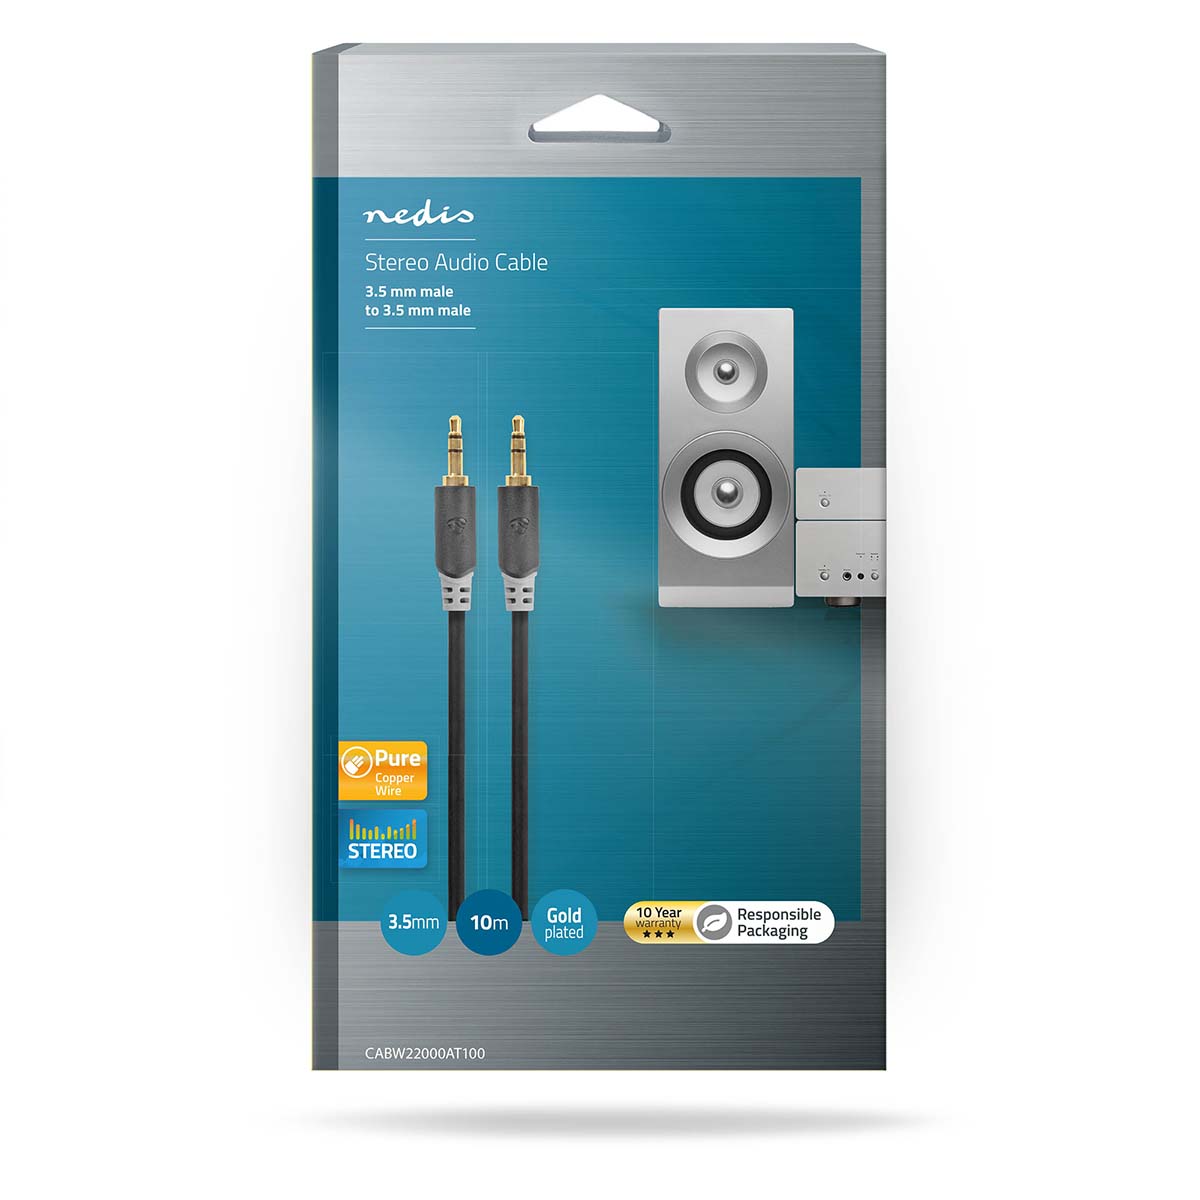 Nedis Stereo Audio kabel, 3.5 mm Male  -  3.5 mm Male, 10m, Highline